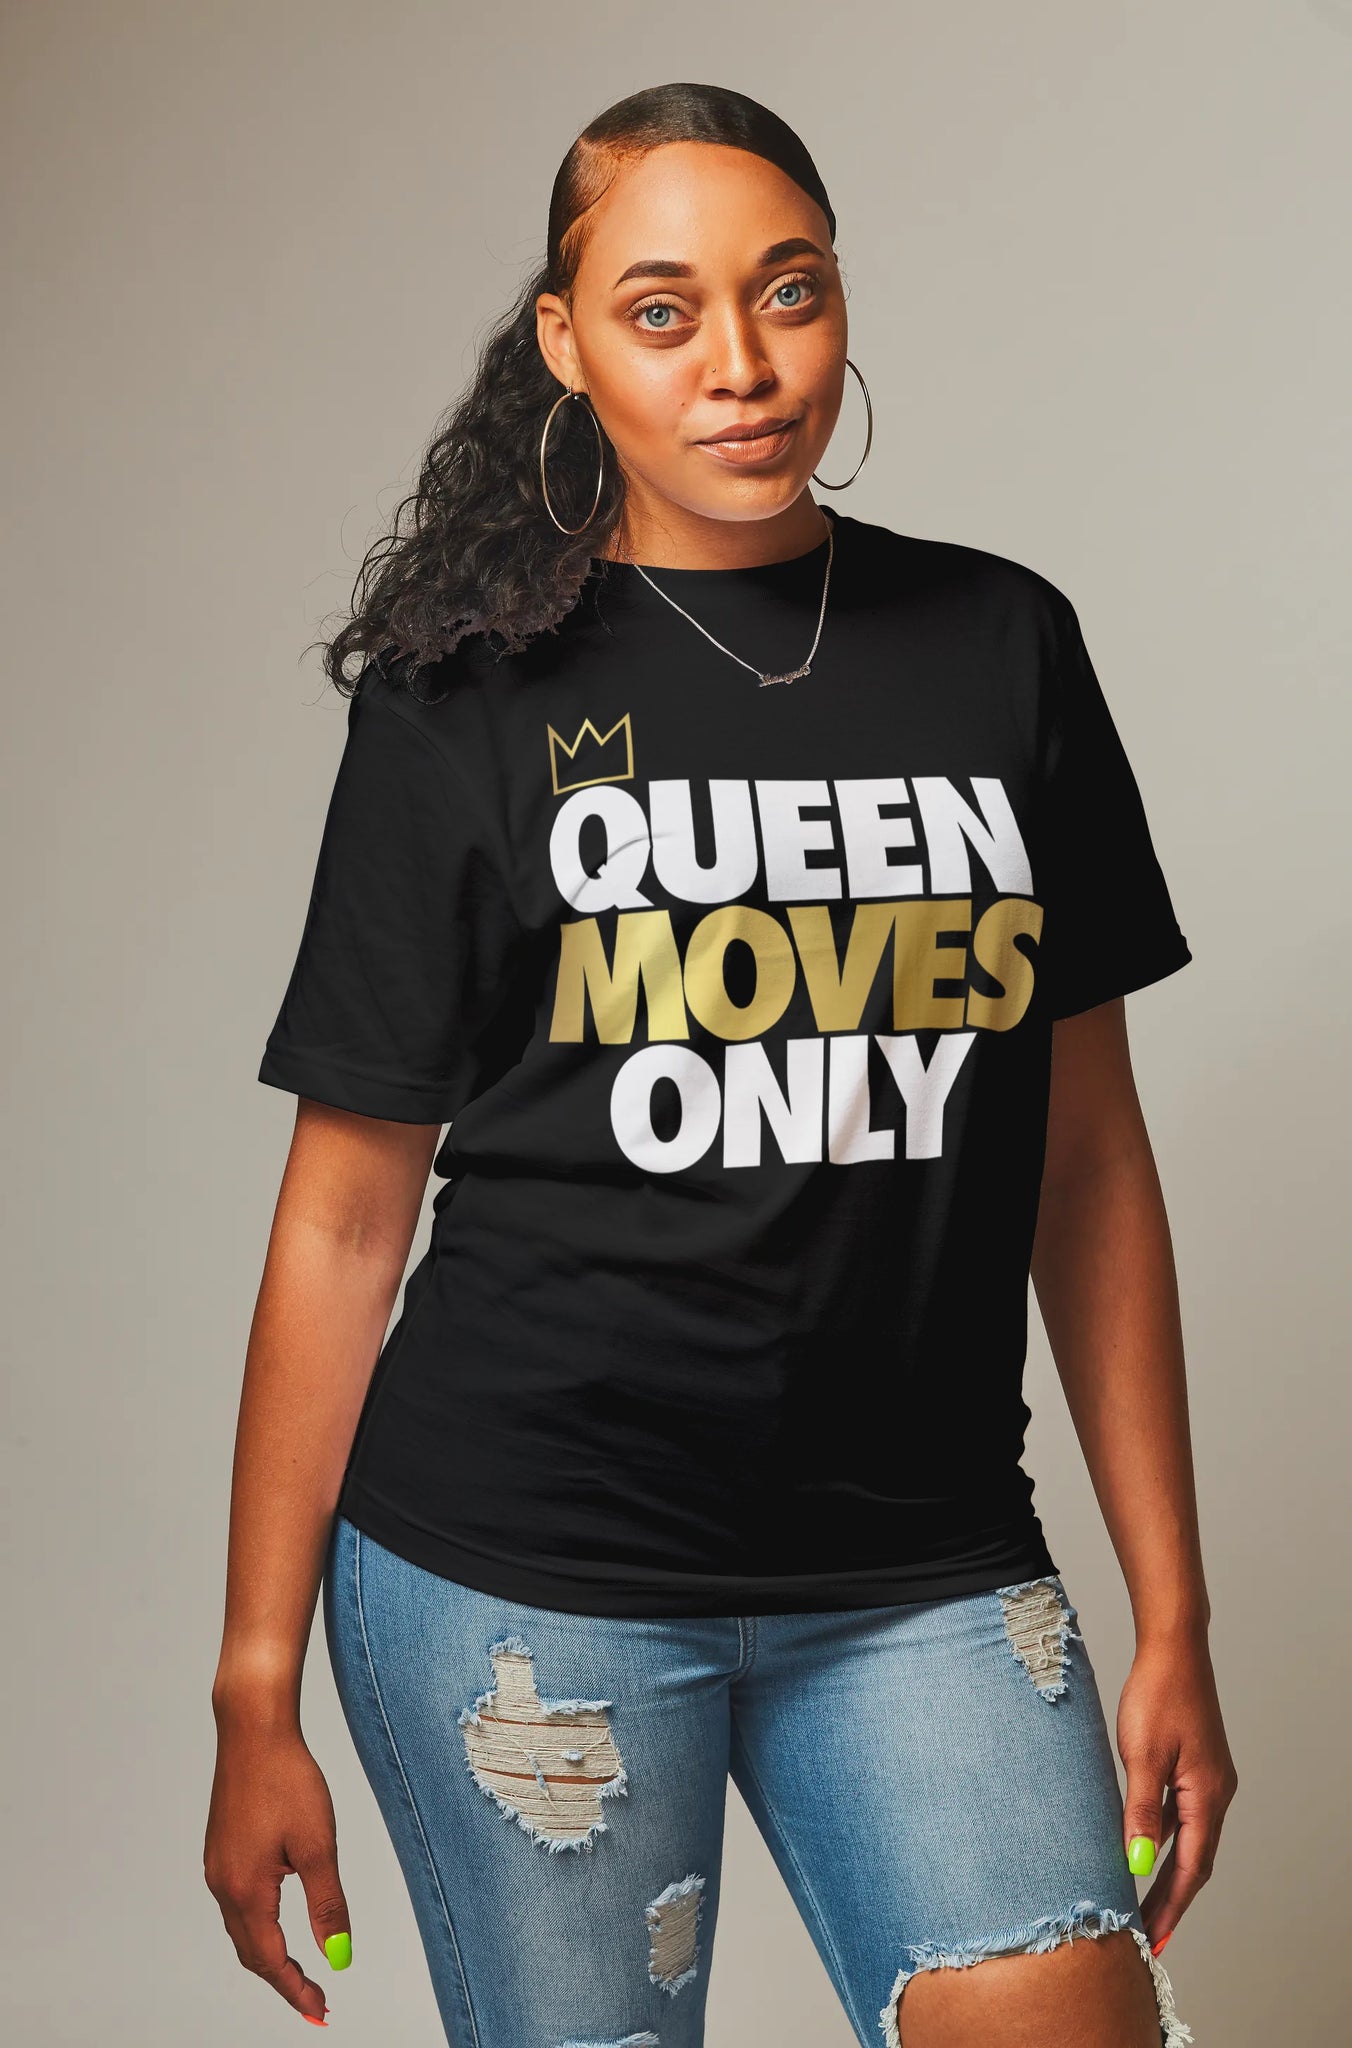 "Queen Moves Only" T-Shirt